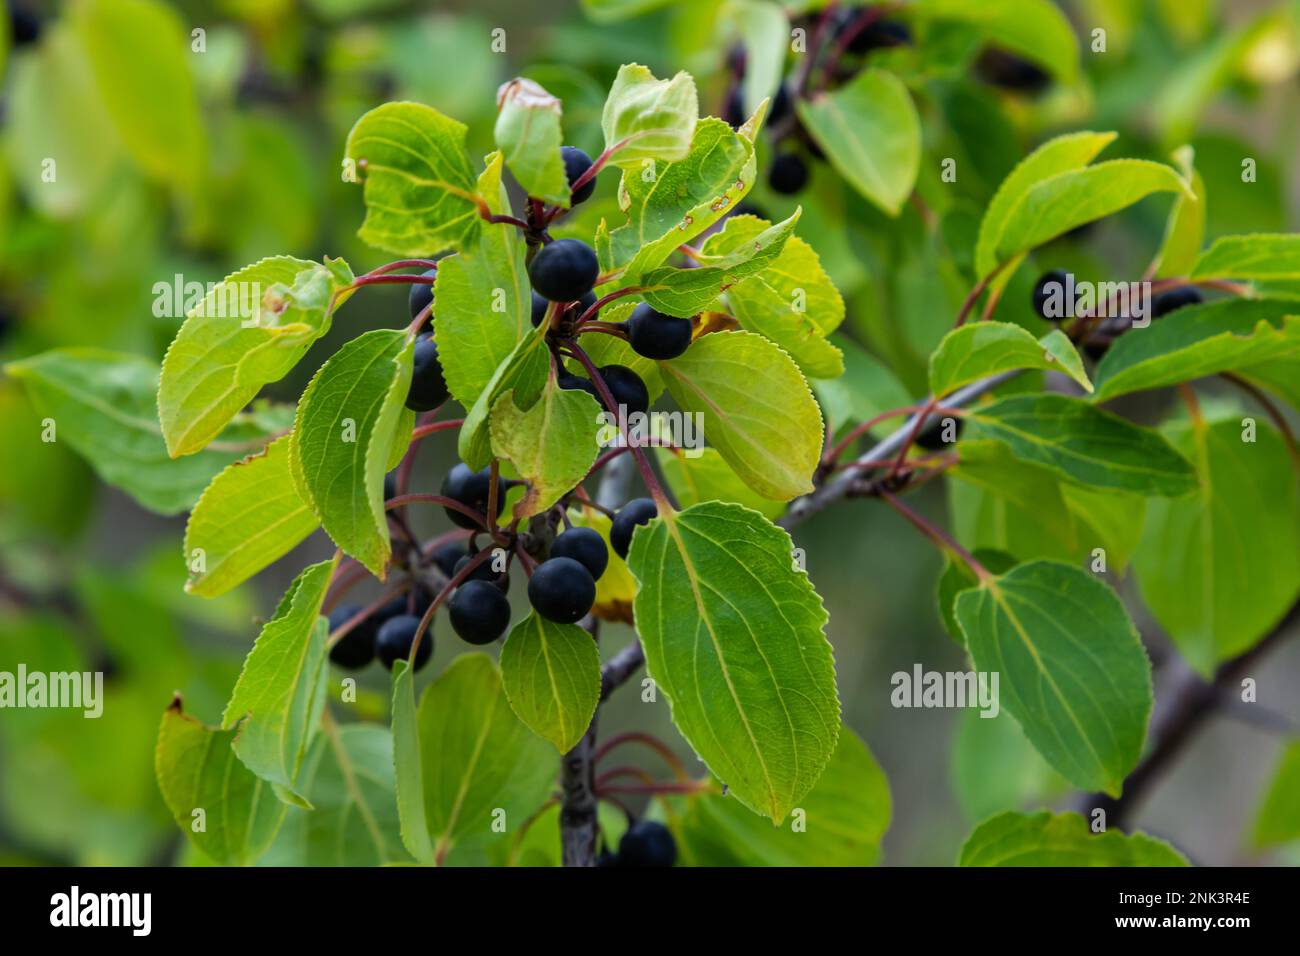 Branch of Common buckthorn Rhamnus cathartica tree in autumn. Beautiful bright view of black berries and green leaves close-up. Stock Photo